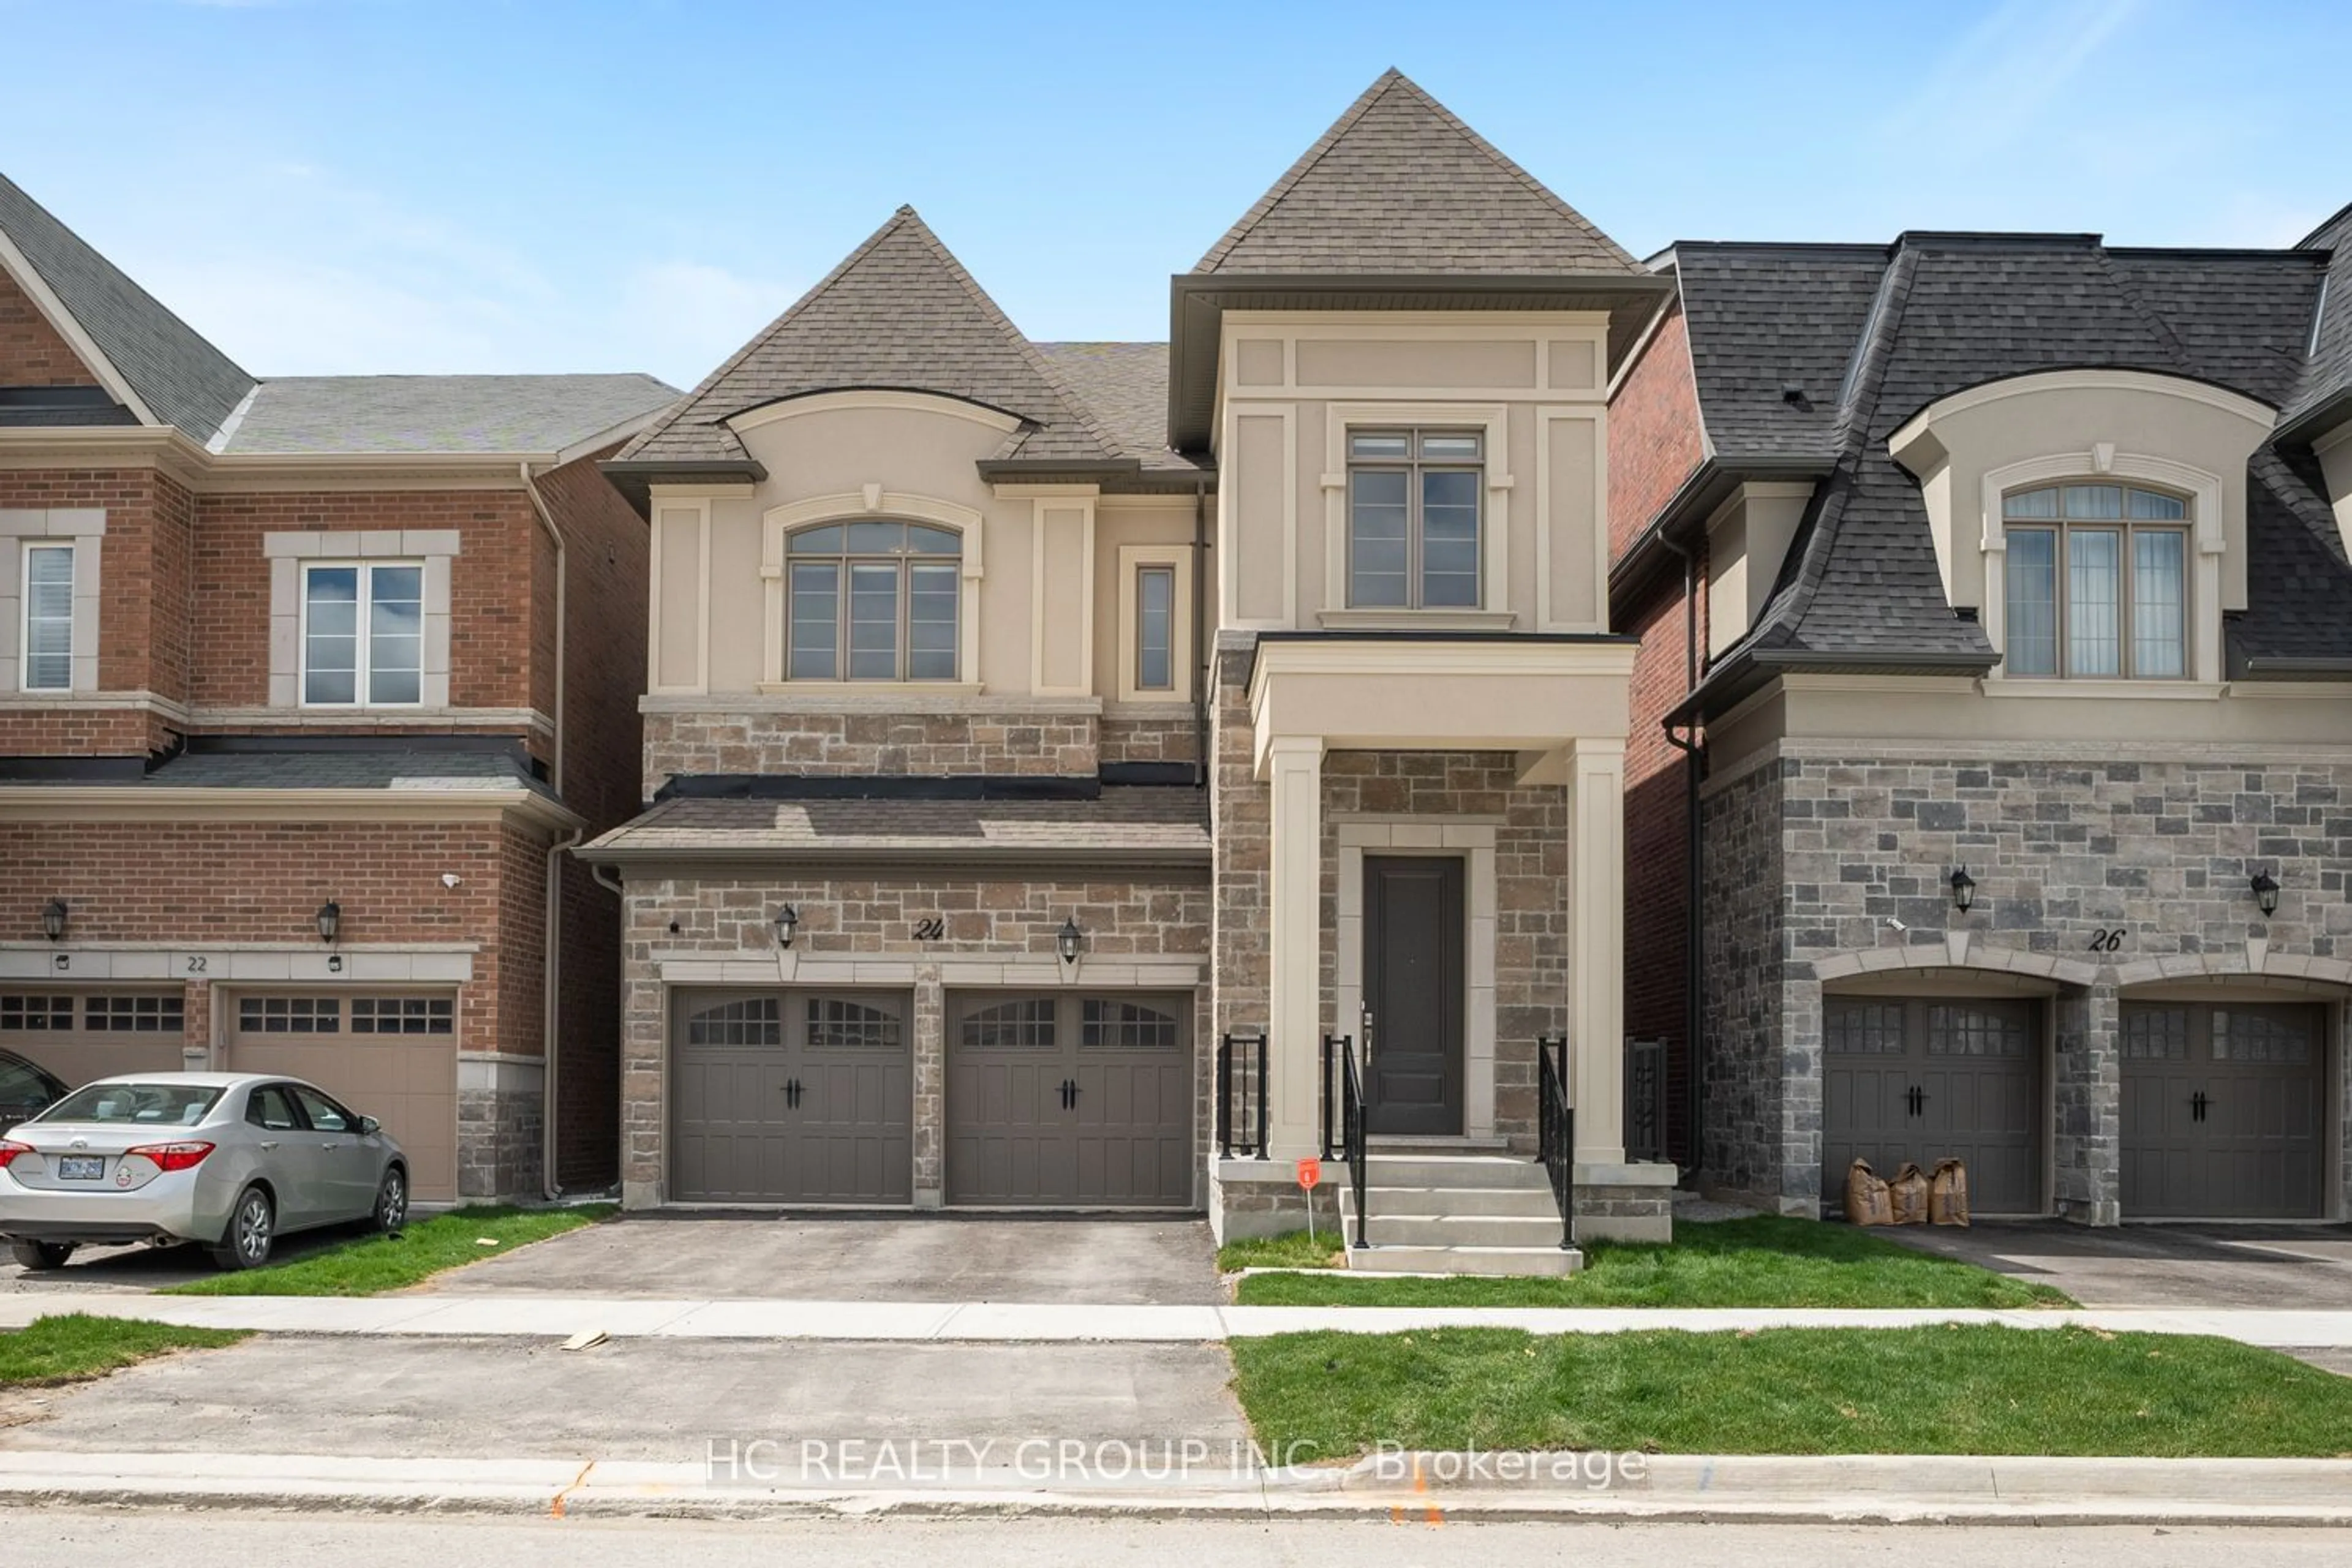 Home with brick exterior material for 24 Solar St, Richmond Hill Ontario L4C 4Z1